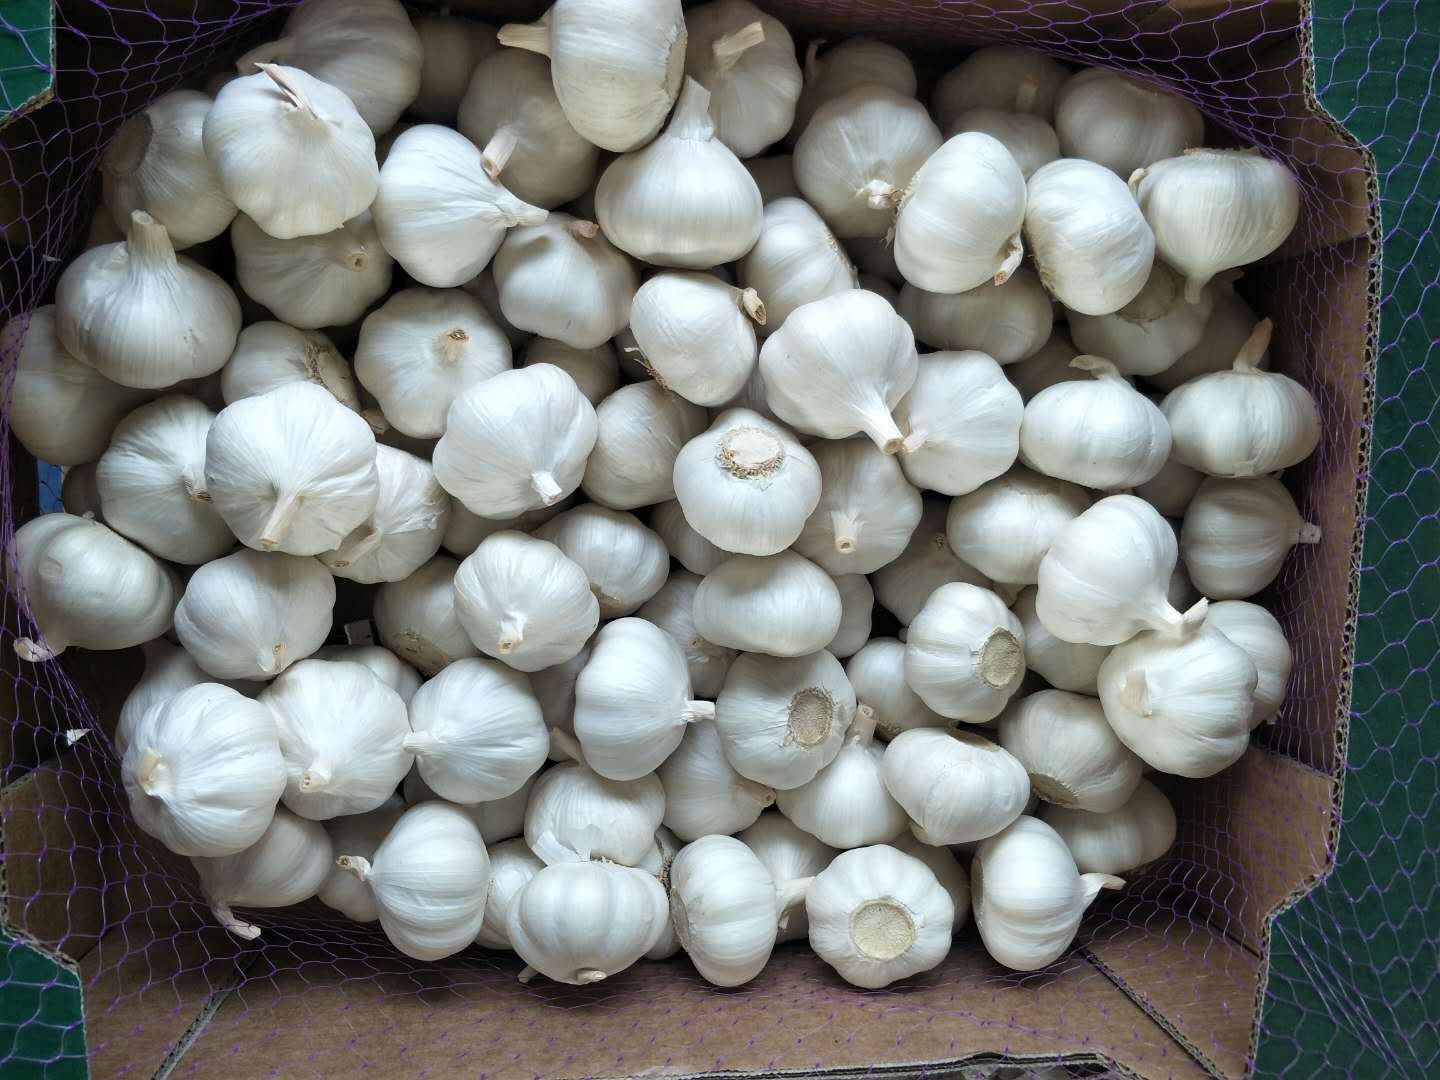 China export shortage of container and 2021 Jan garlic price forecast